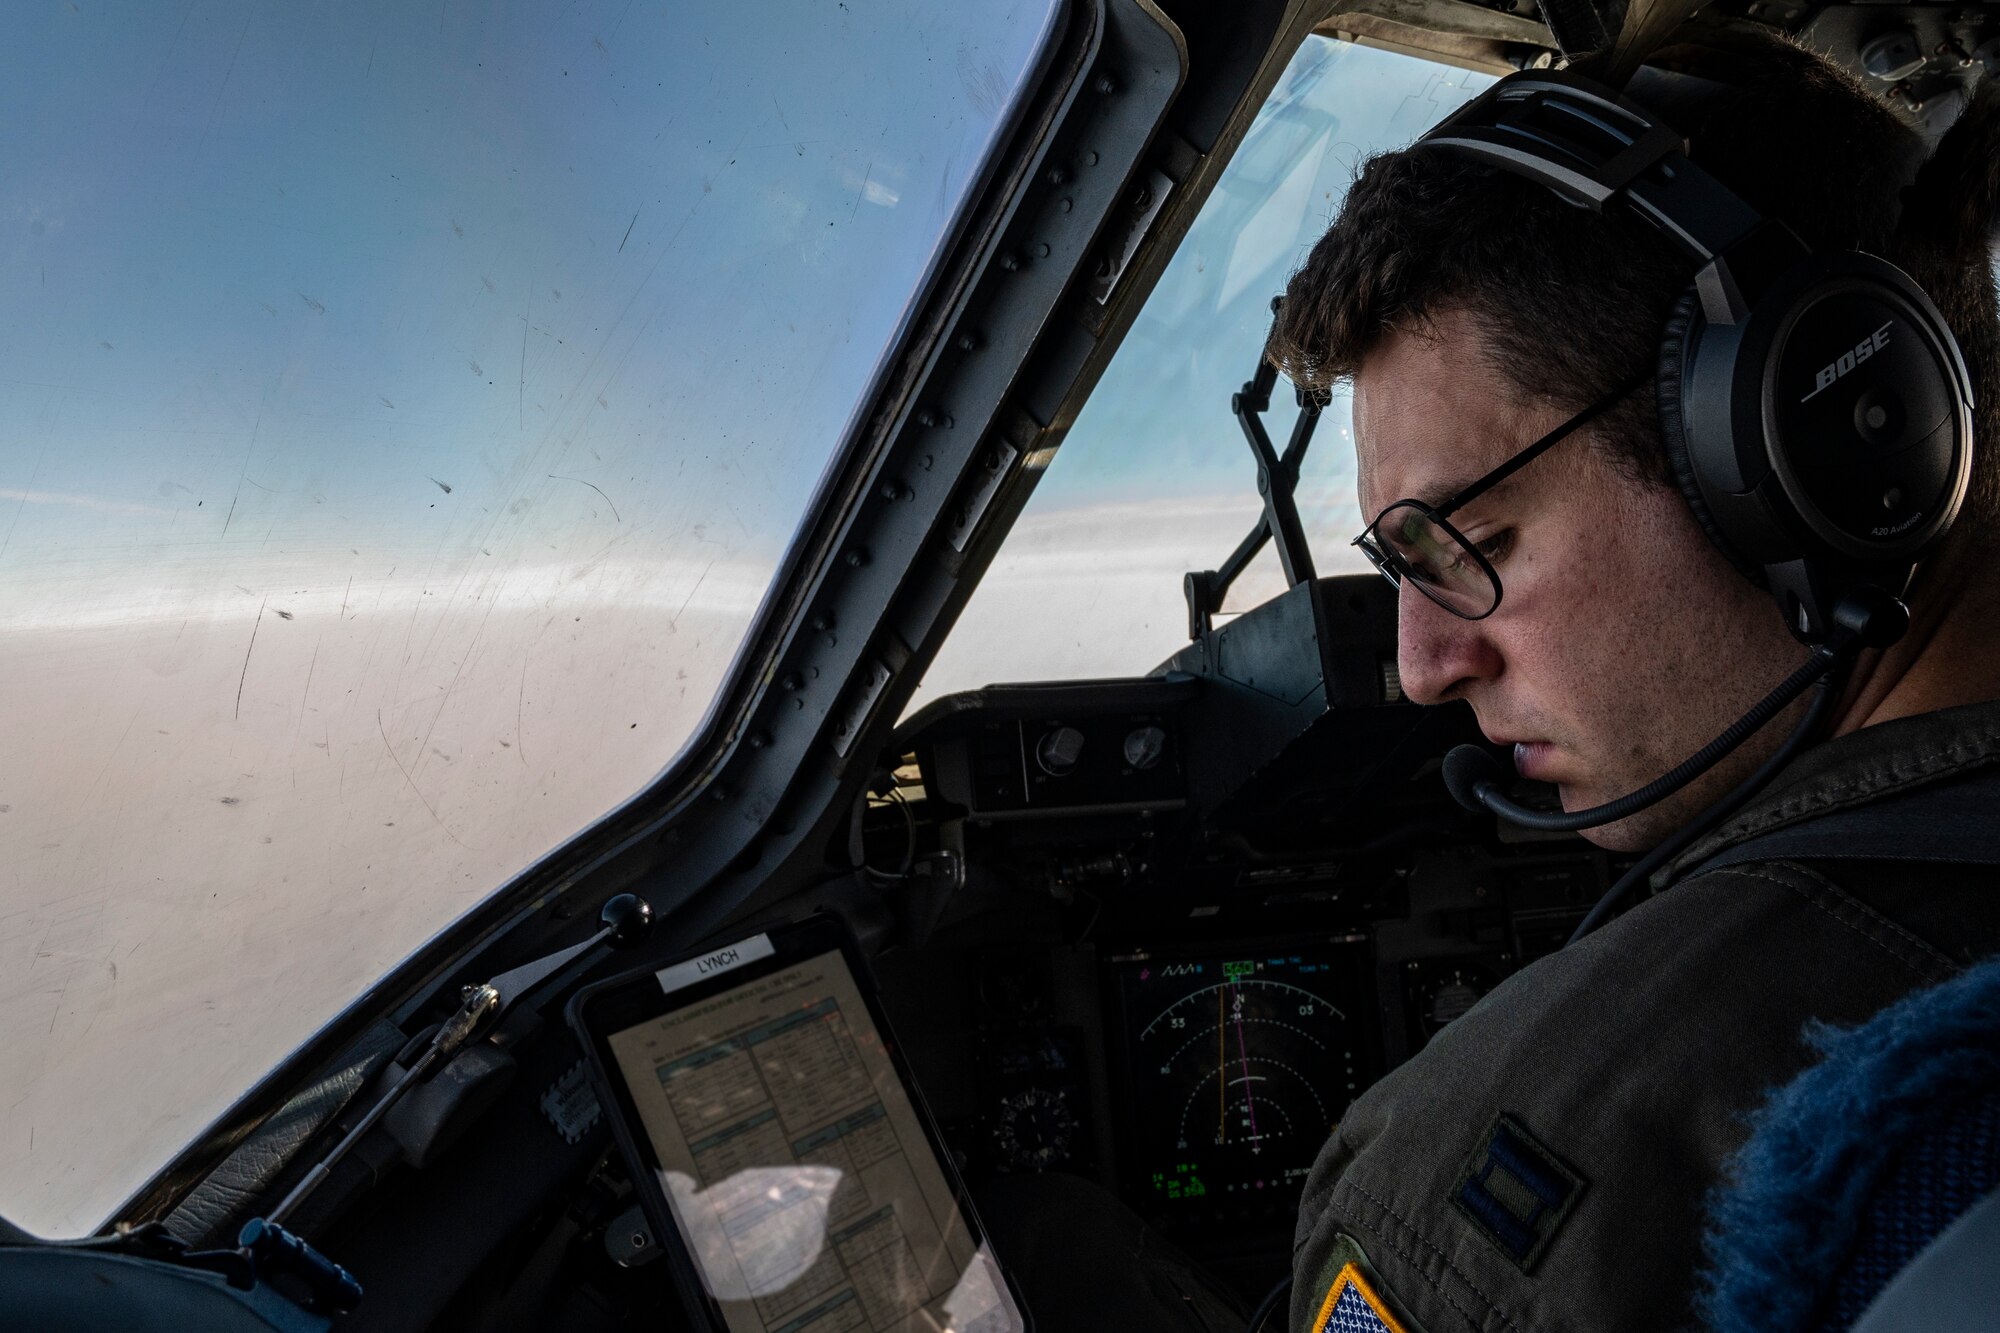 U.S. Air Force Capt. Benjamin Lynch, 517 Airlift Squadron pilot from Joint Base Elmendorf-Richardson, Alaska, flies a C-17 Globemaster III with U.S. Army Paratrooper on June 15, 2022 during RED FLAG-Alaska 22-2. Approximately 1,600 service members from three nations participate in flying, maintaining and supporting more than 70 aircraft from over 22 units during this iteration of exercise. (U.S. Air Force photo by Sheila deVera)